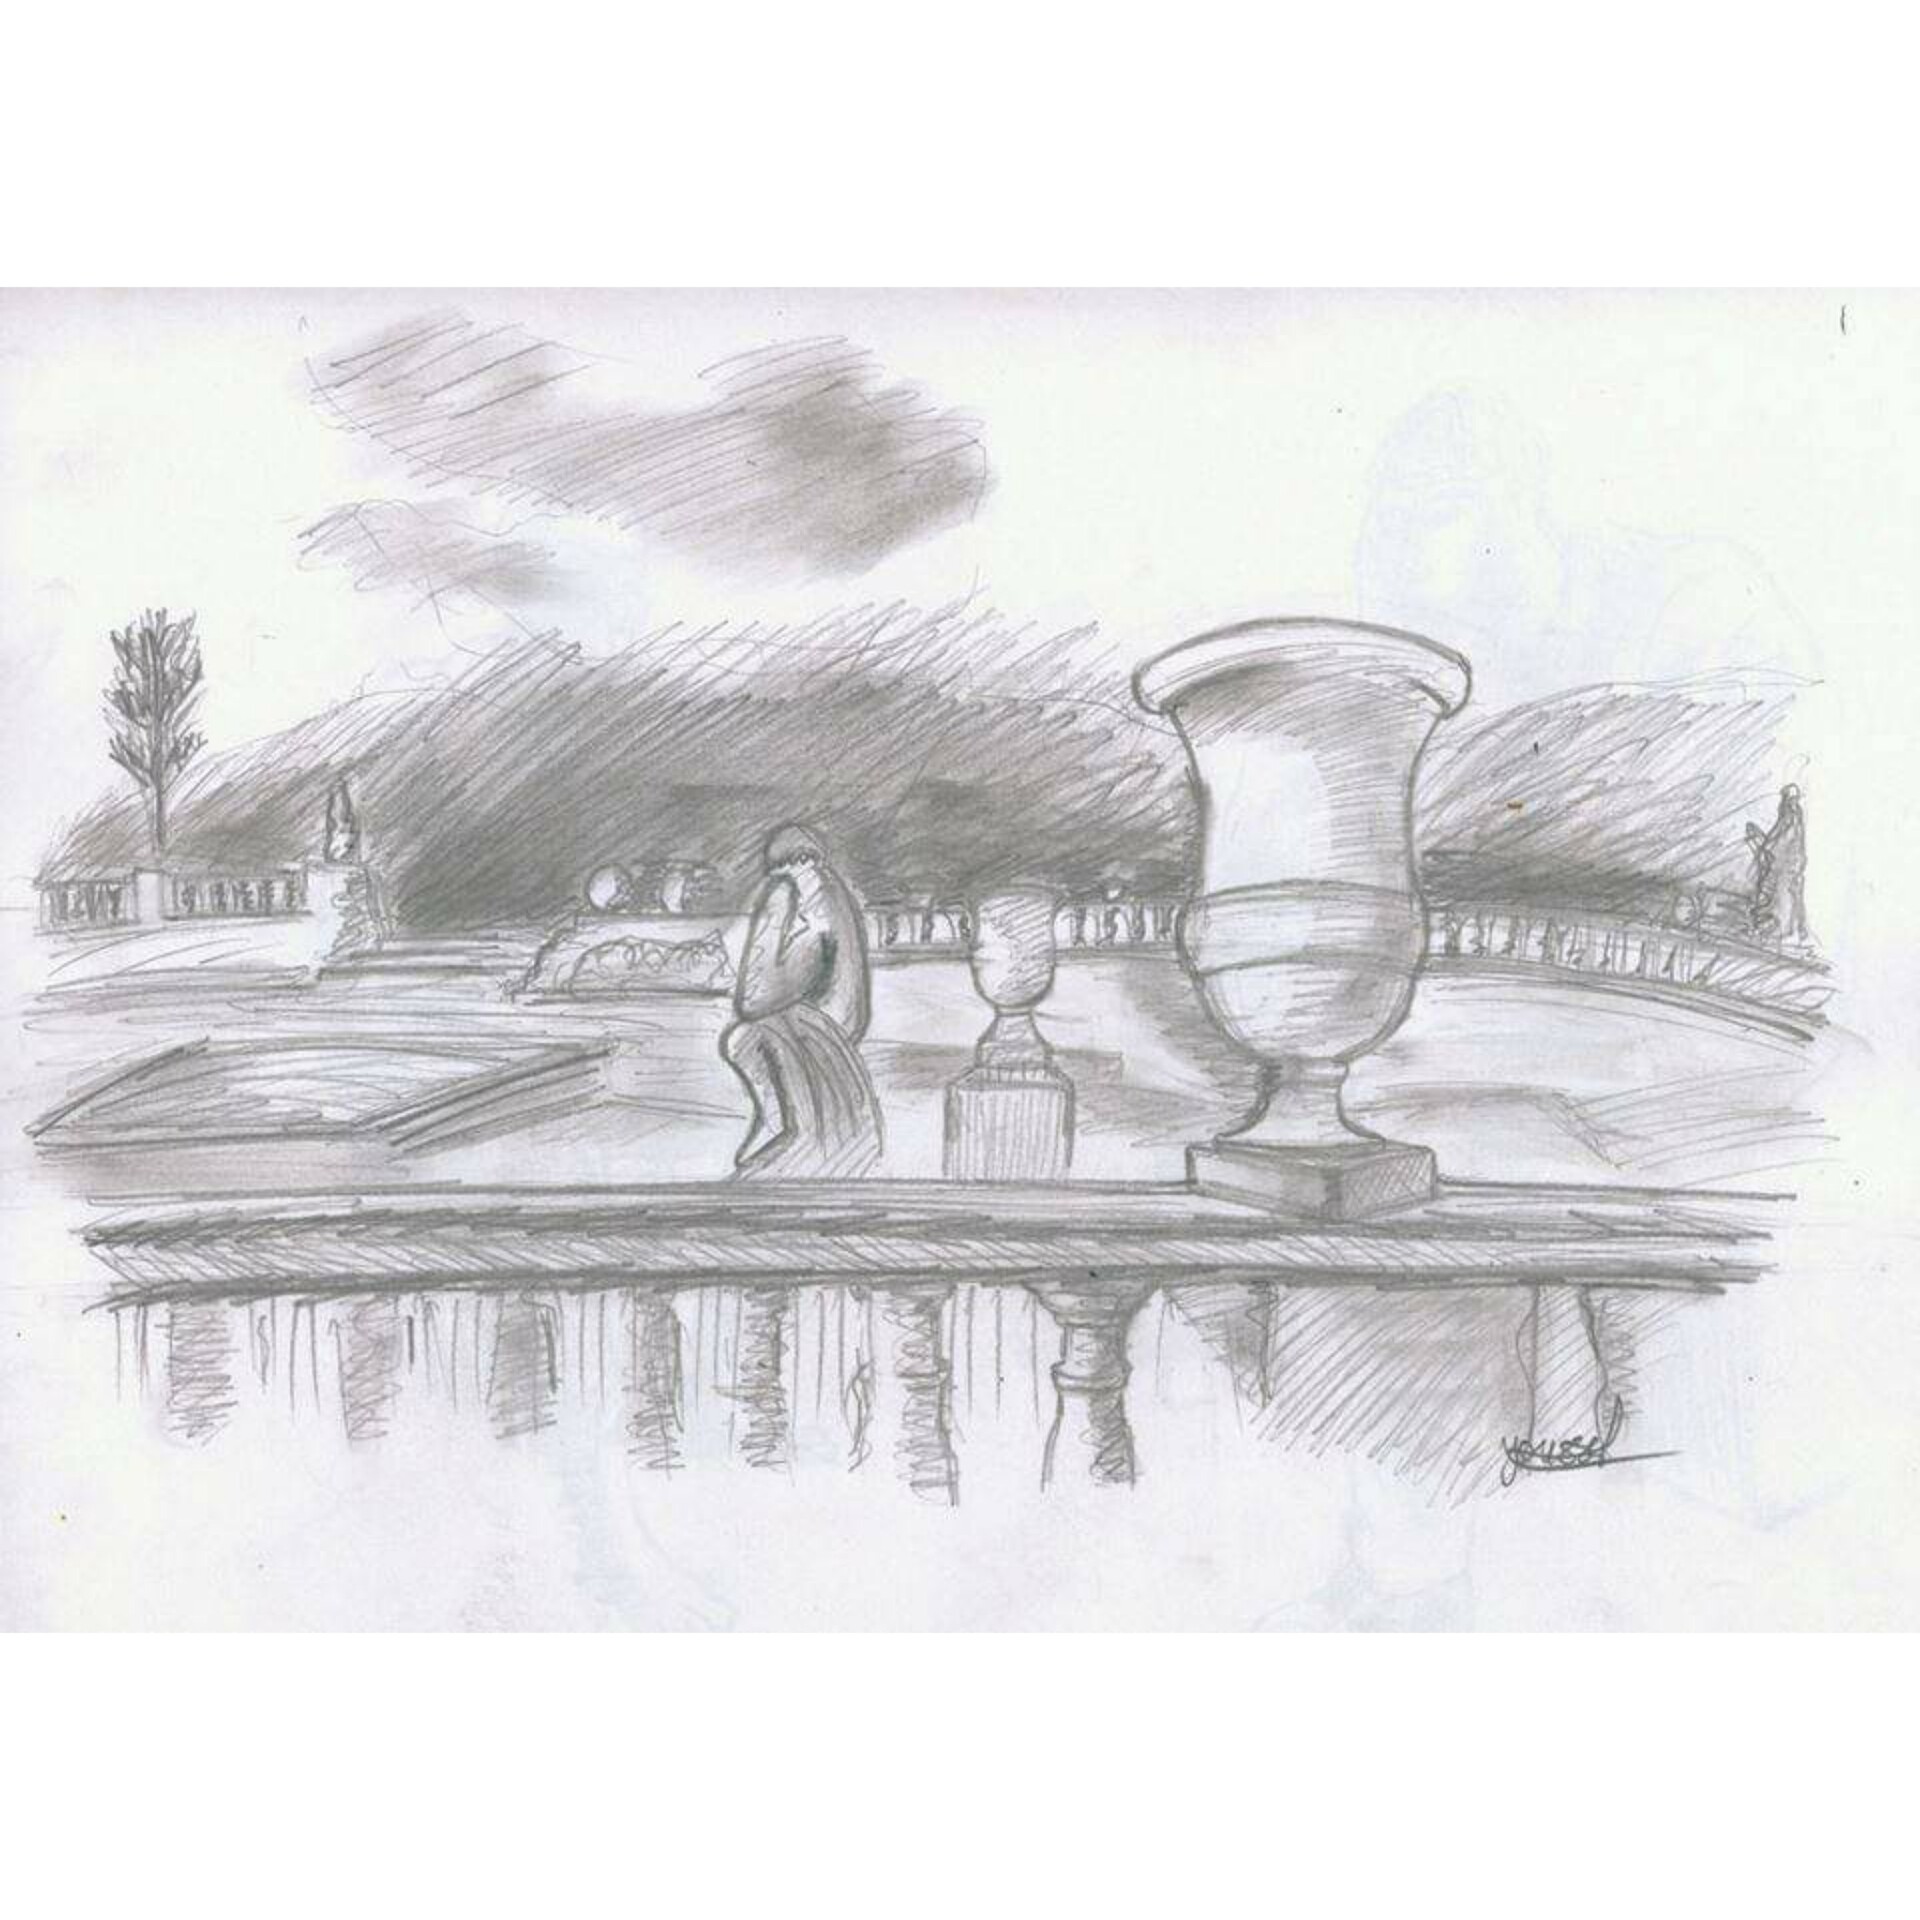 Pencil sketch scenery. by Artistic-Suleman on DeviantArt